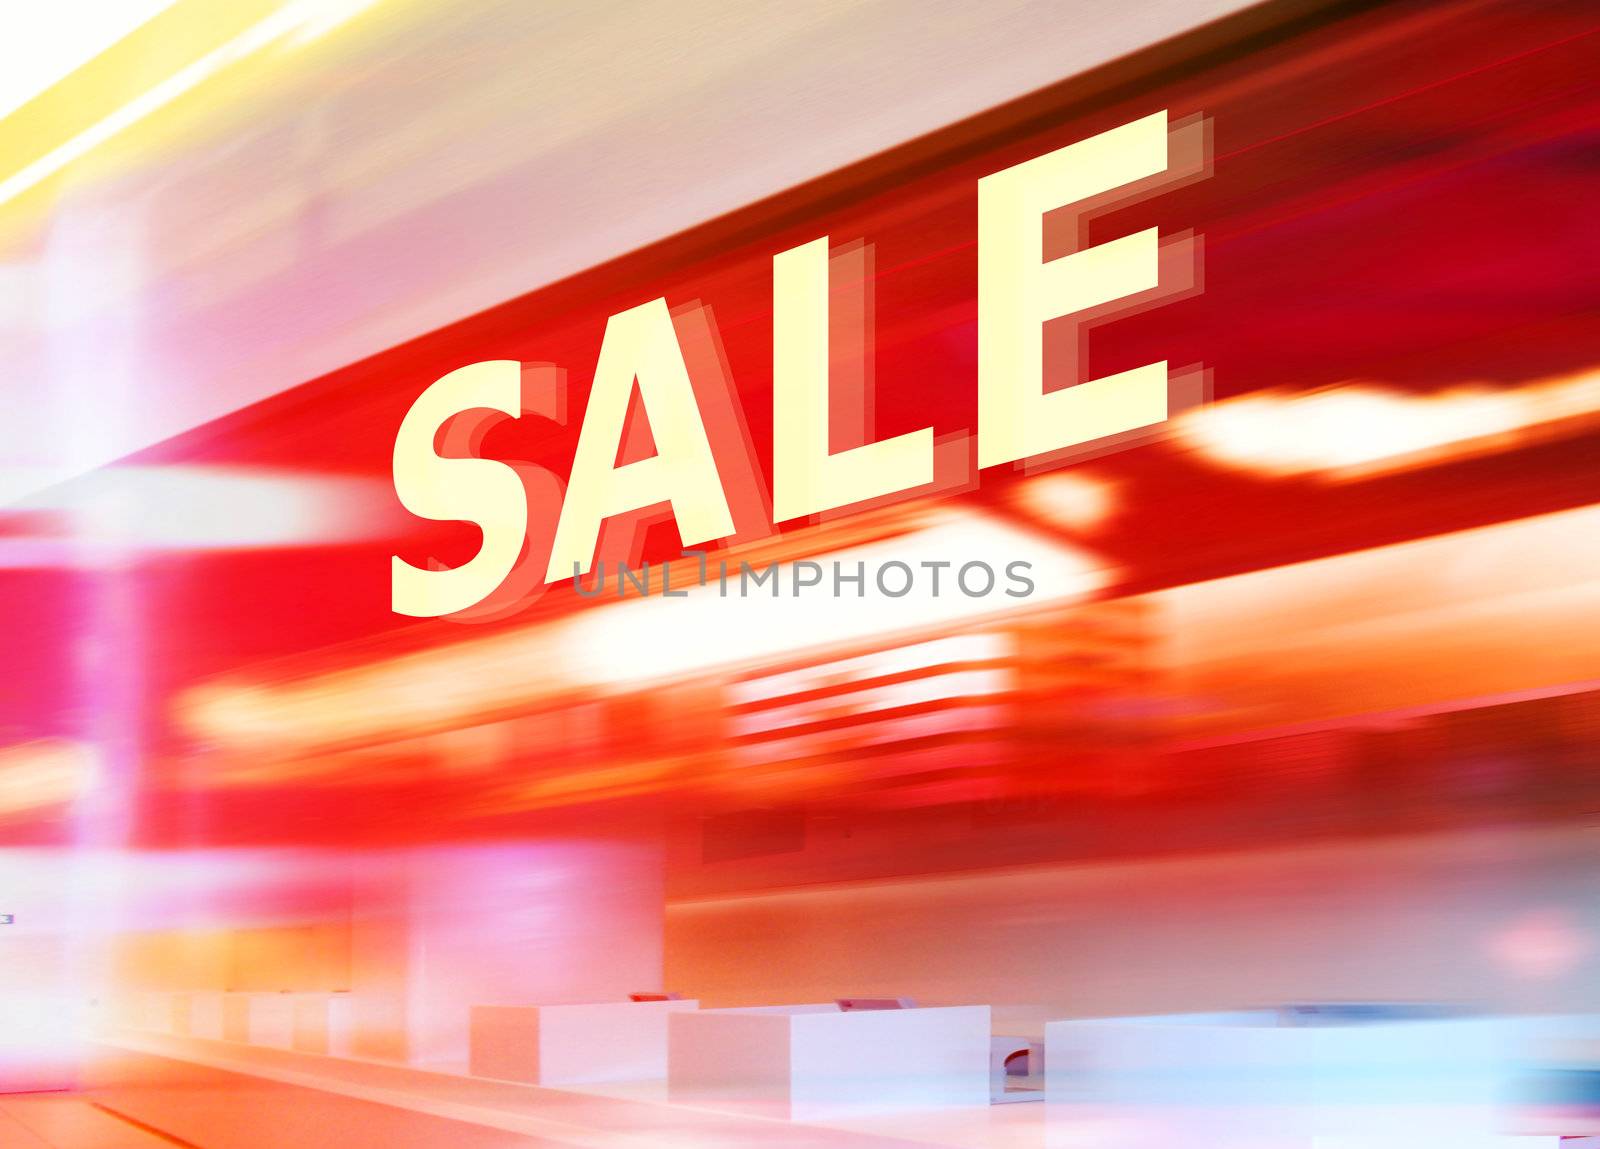 sale by ssuaphoto